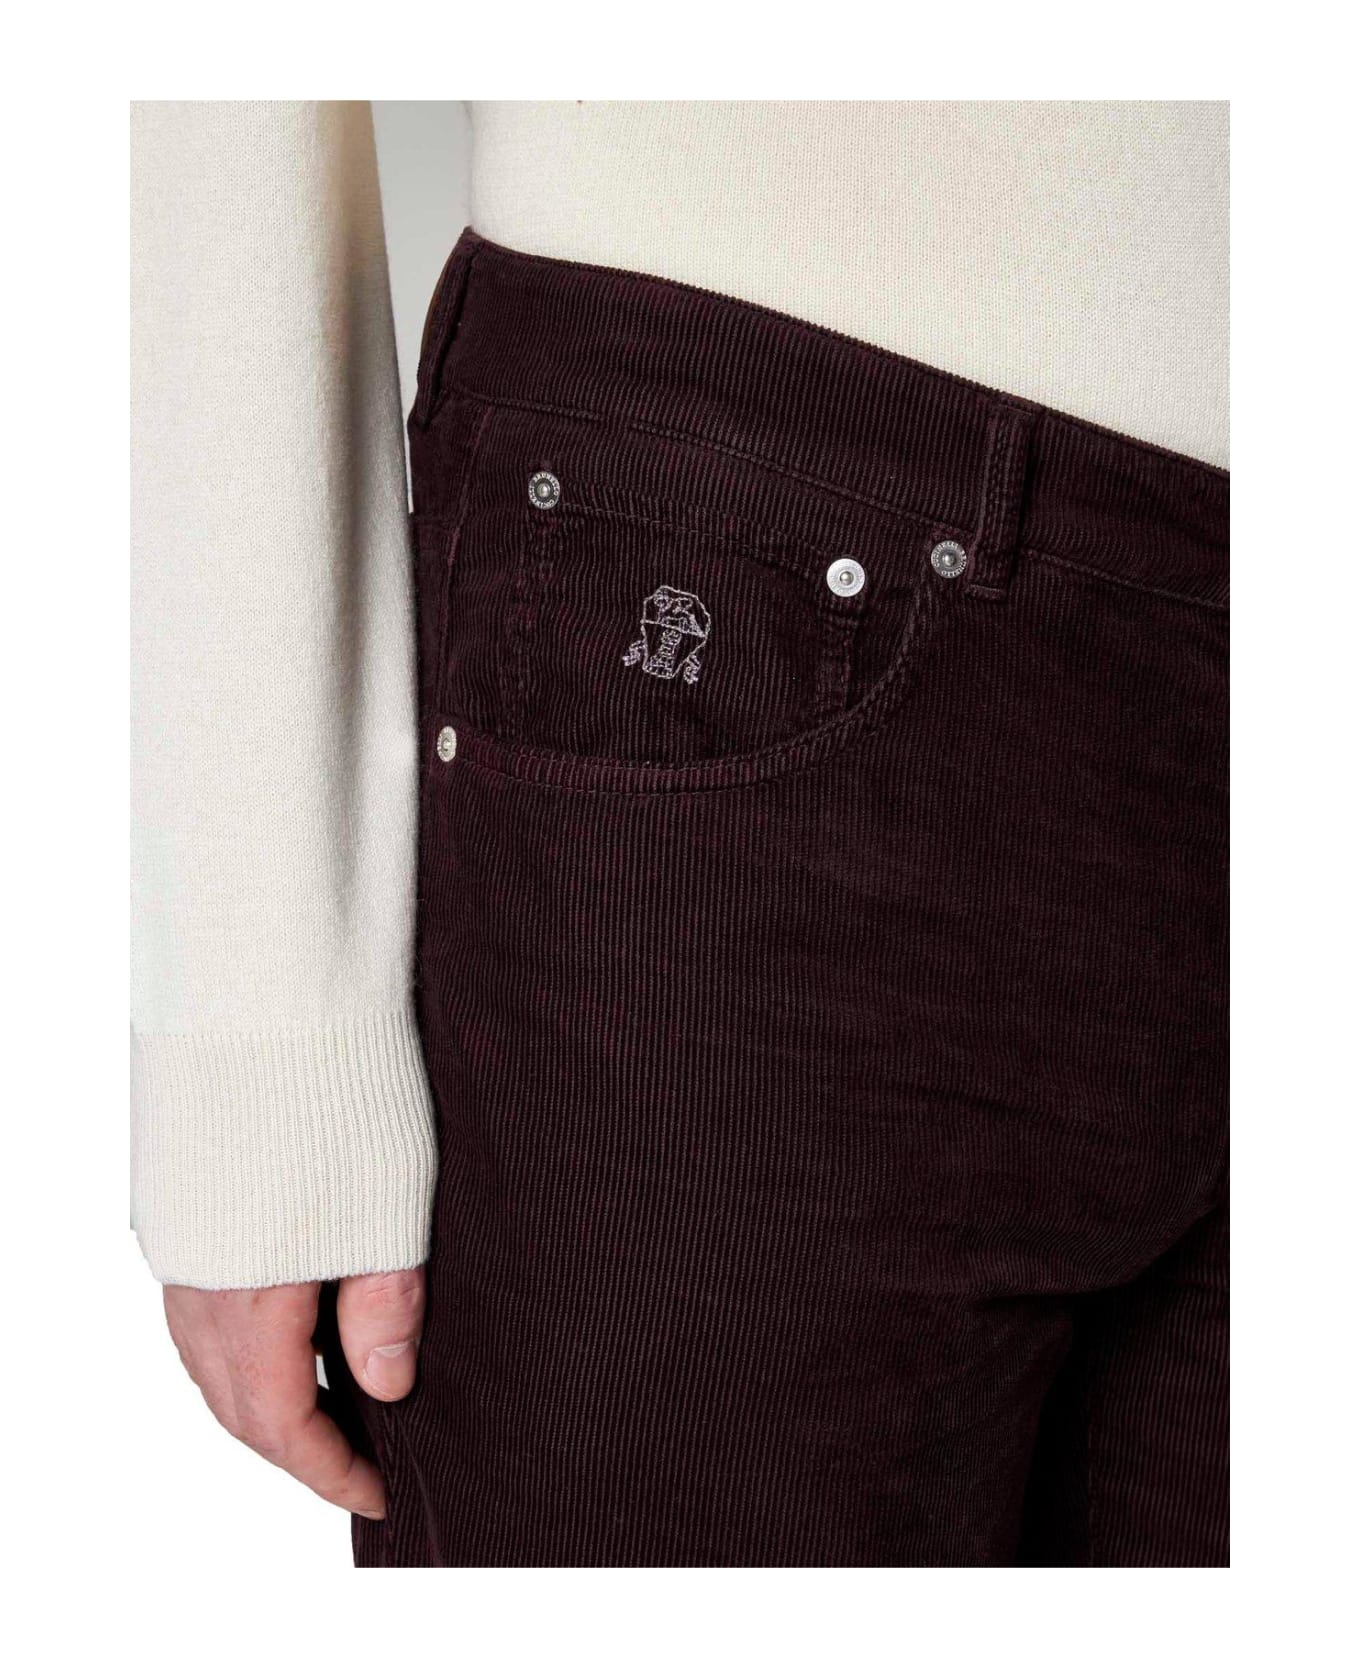 Brunello Cucinelli Logo Embroidered Cropped Corduroy Pants - Bordeaux